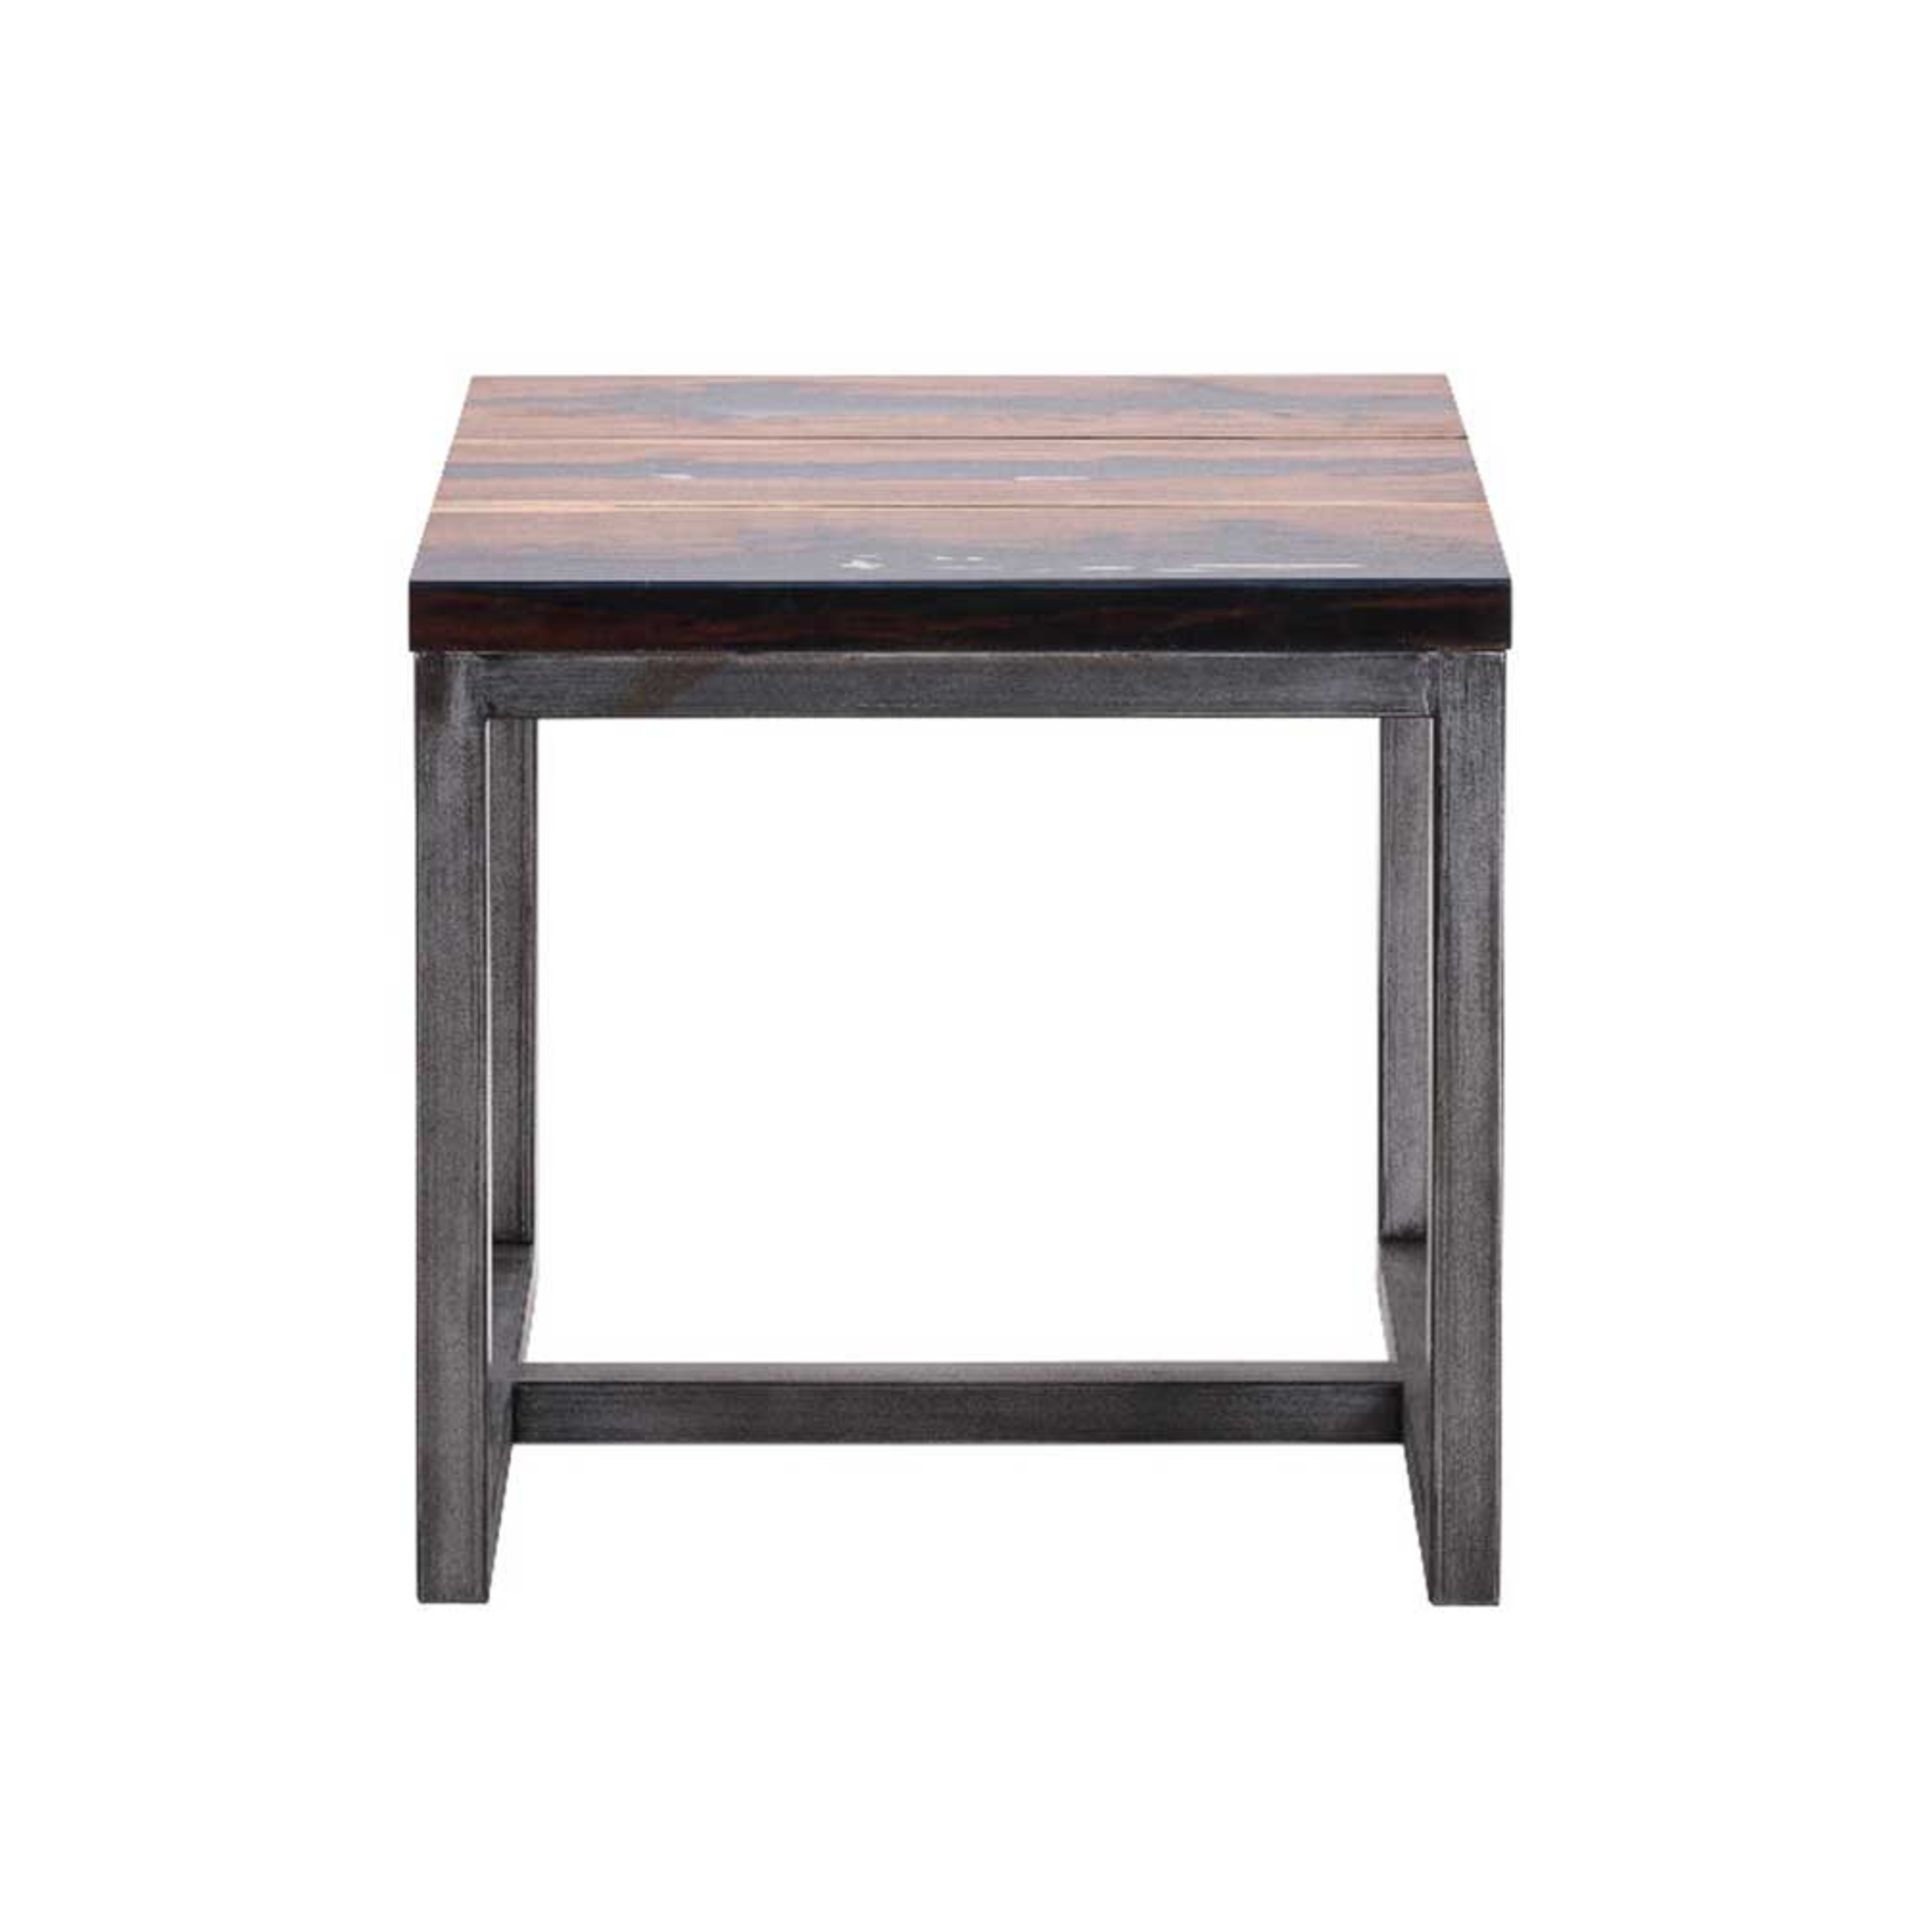 Trapt Side Table The Trapt Features Hearty Beams Of Exotic African Balsam Wood In A Stunning Natural - Image 3 of 3